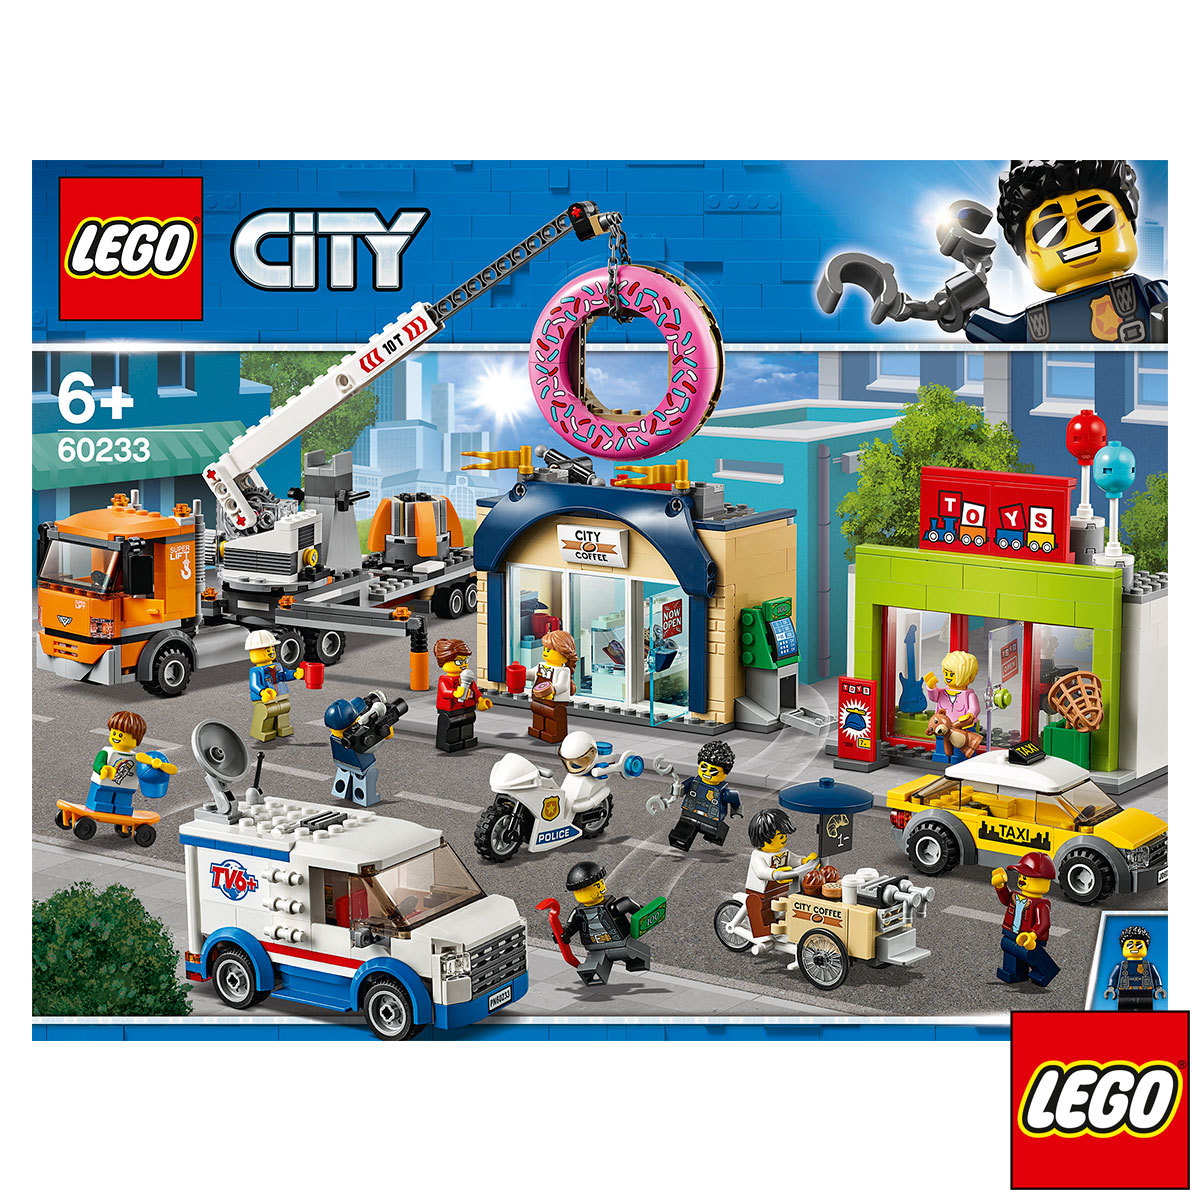 Boxed front image of the lego donut shop opening